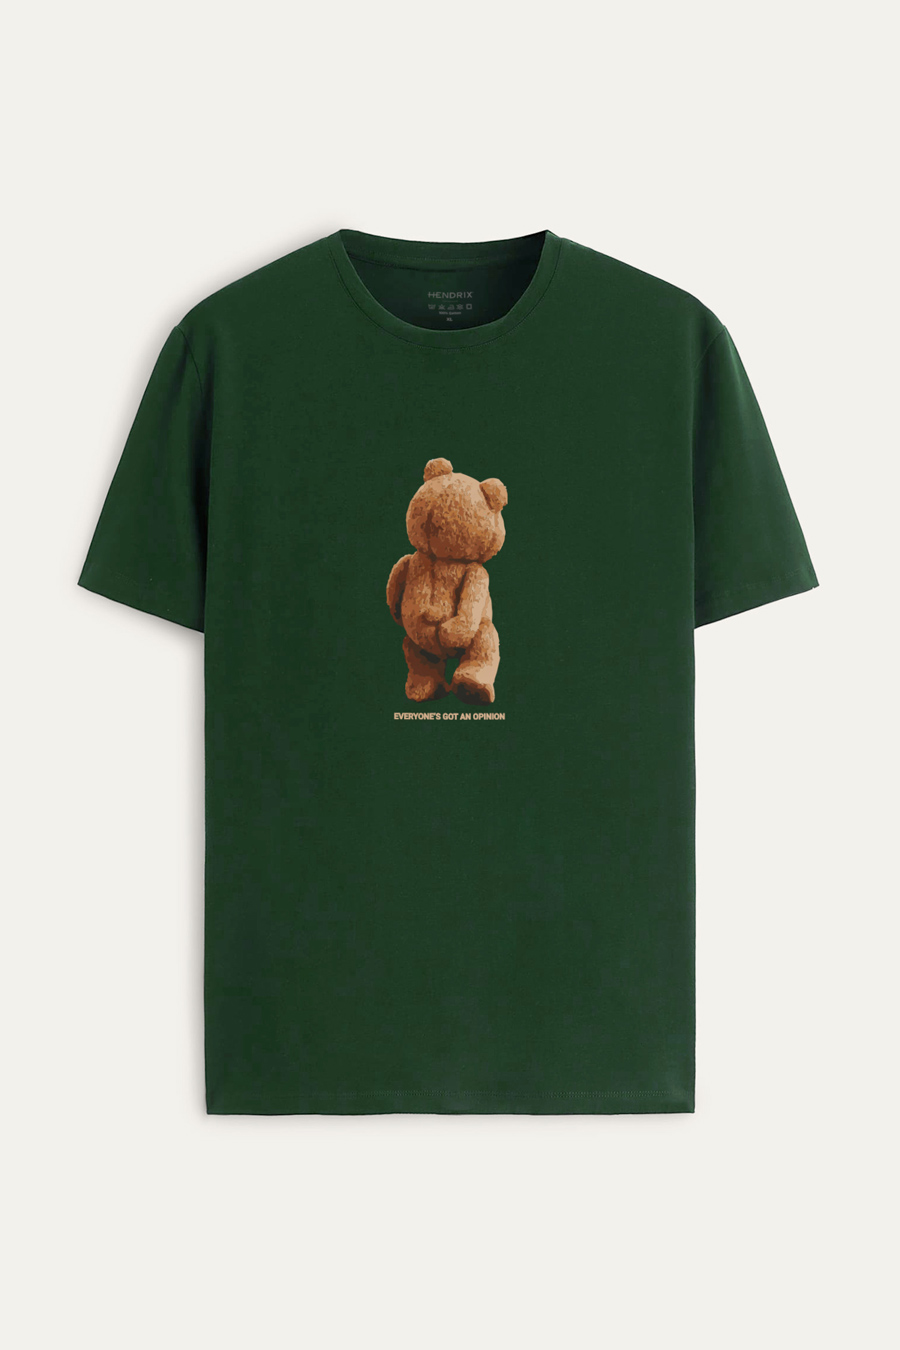 T-shirt in Green Color with Teddy’s Opinion Print – Hedrix